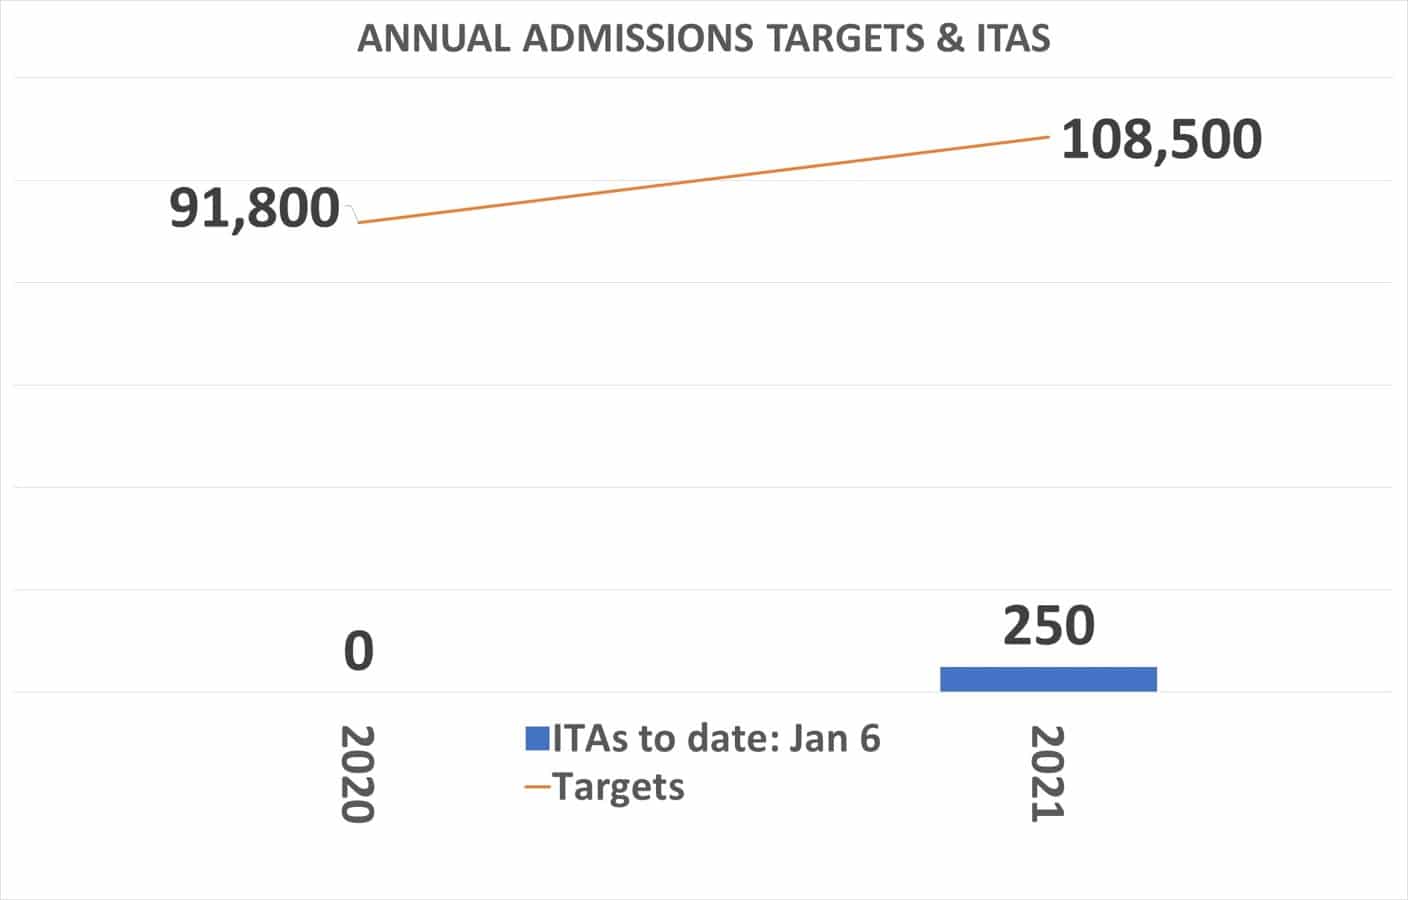 Annual Admission targets and ITAS